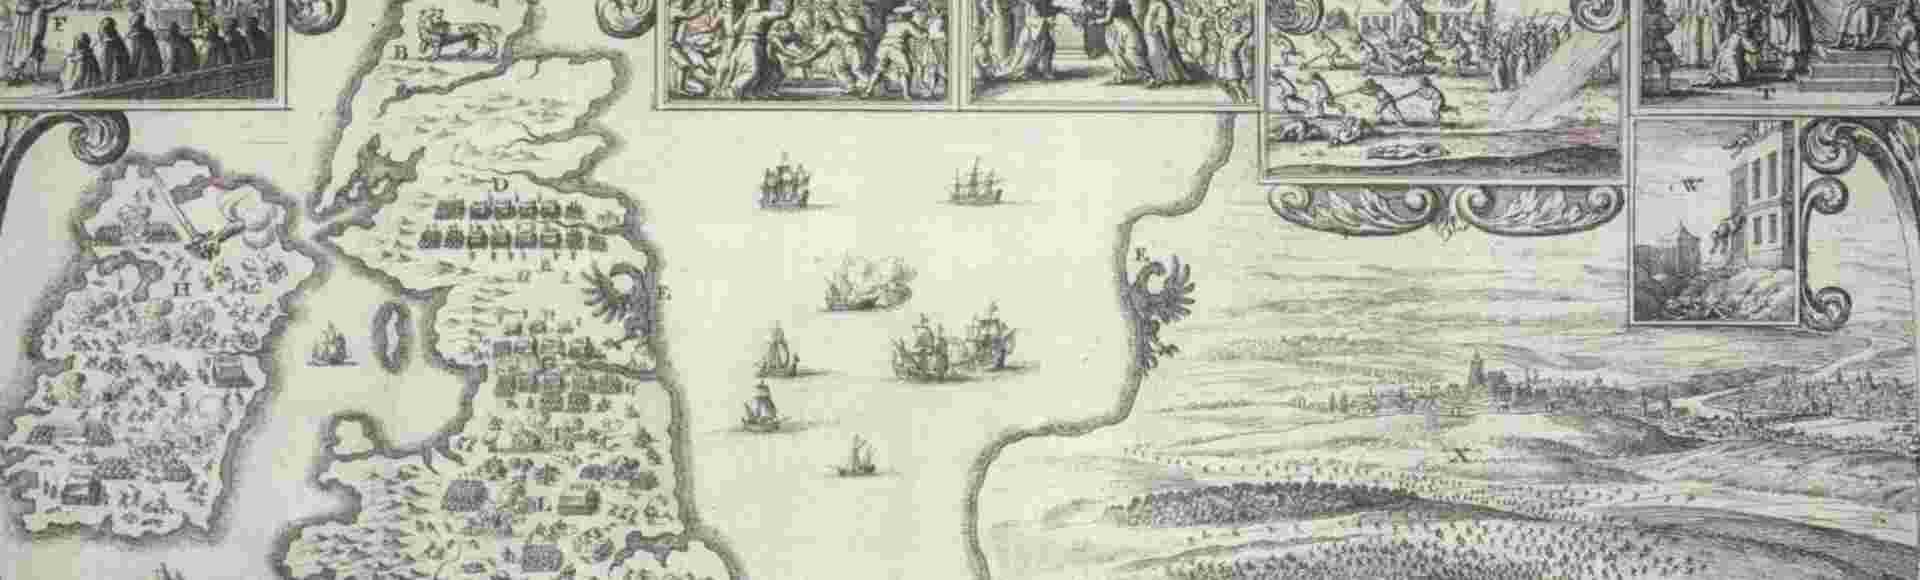 Wenceslas Hollar's map of England with scenes from the beginning of the Civil War.